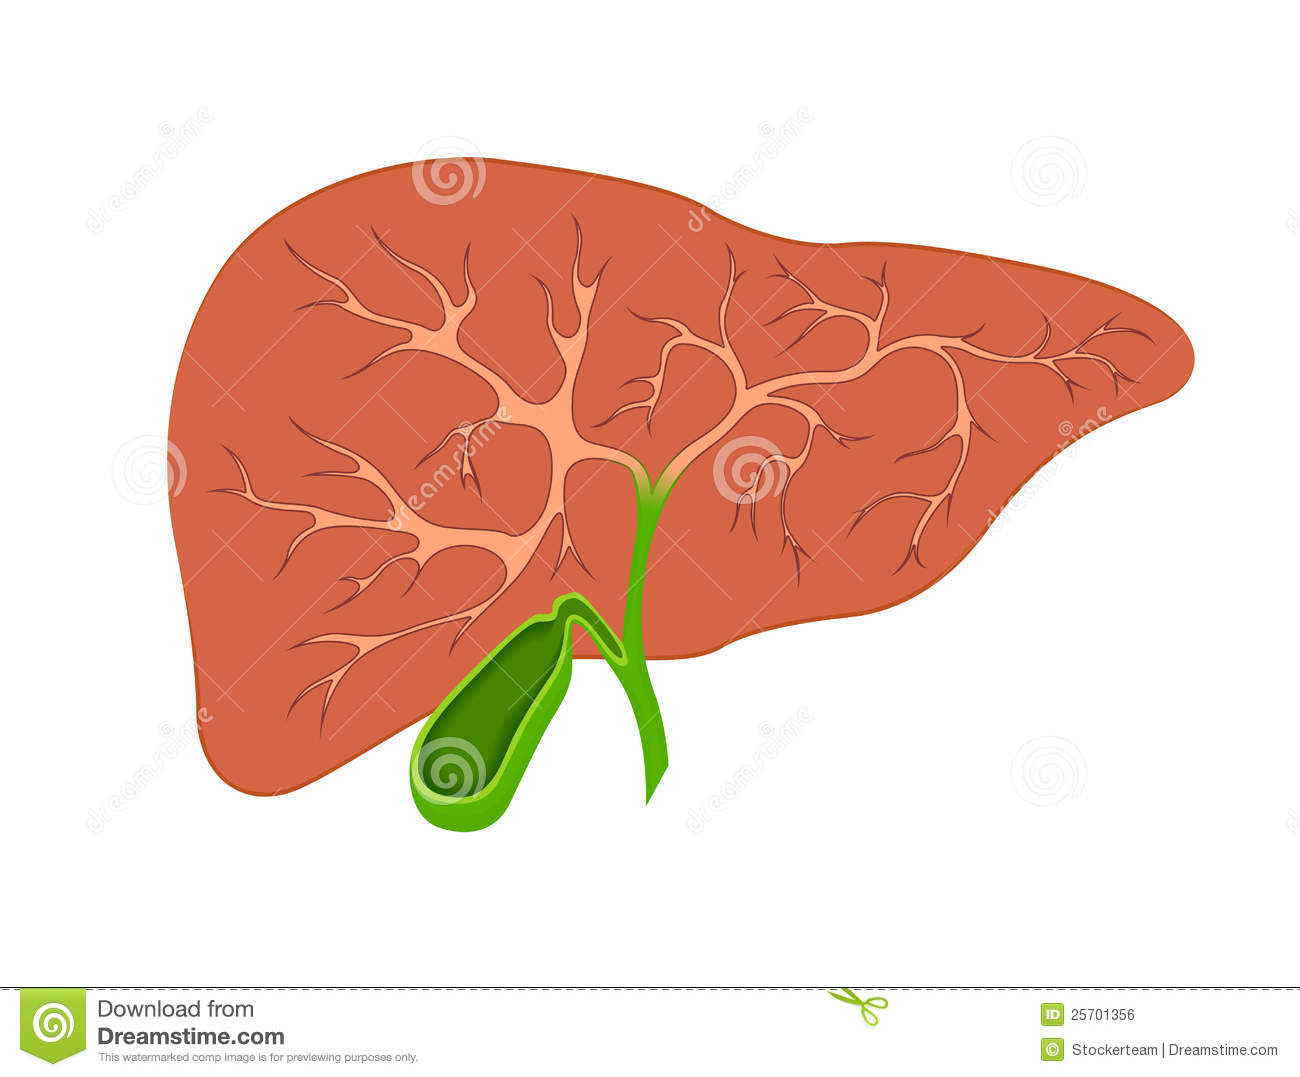 Liver Clipart Liver And Gall Bladder In The